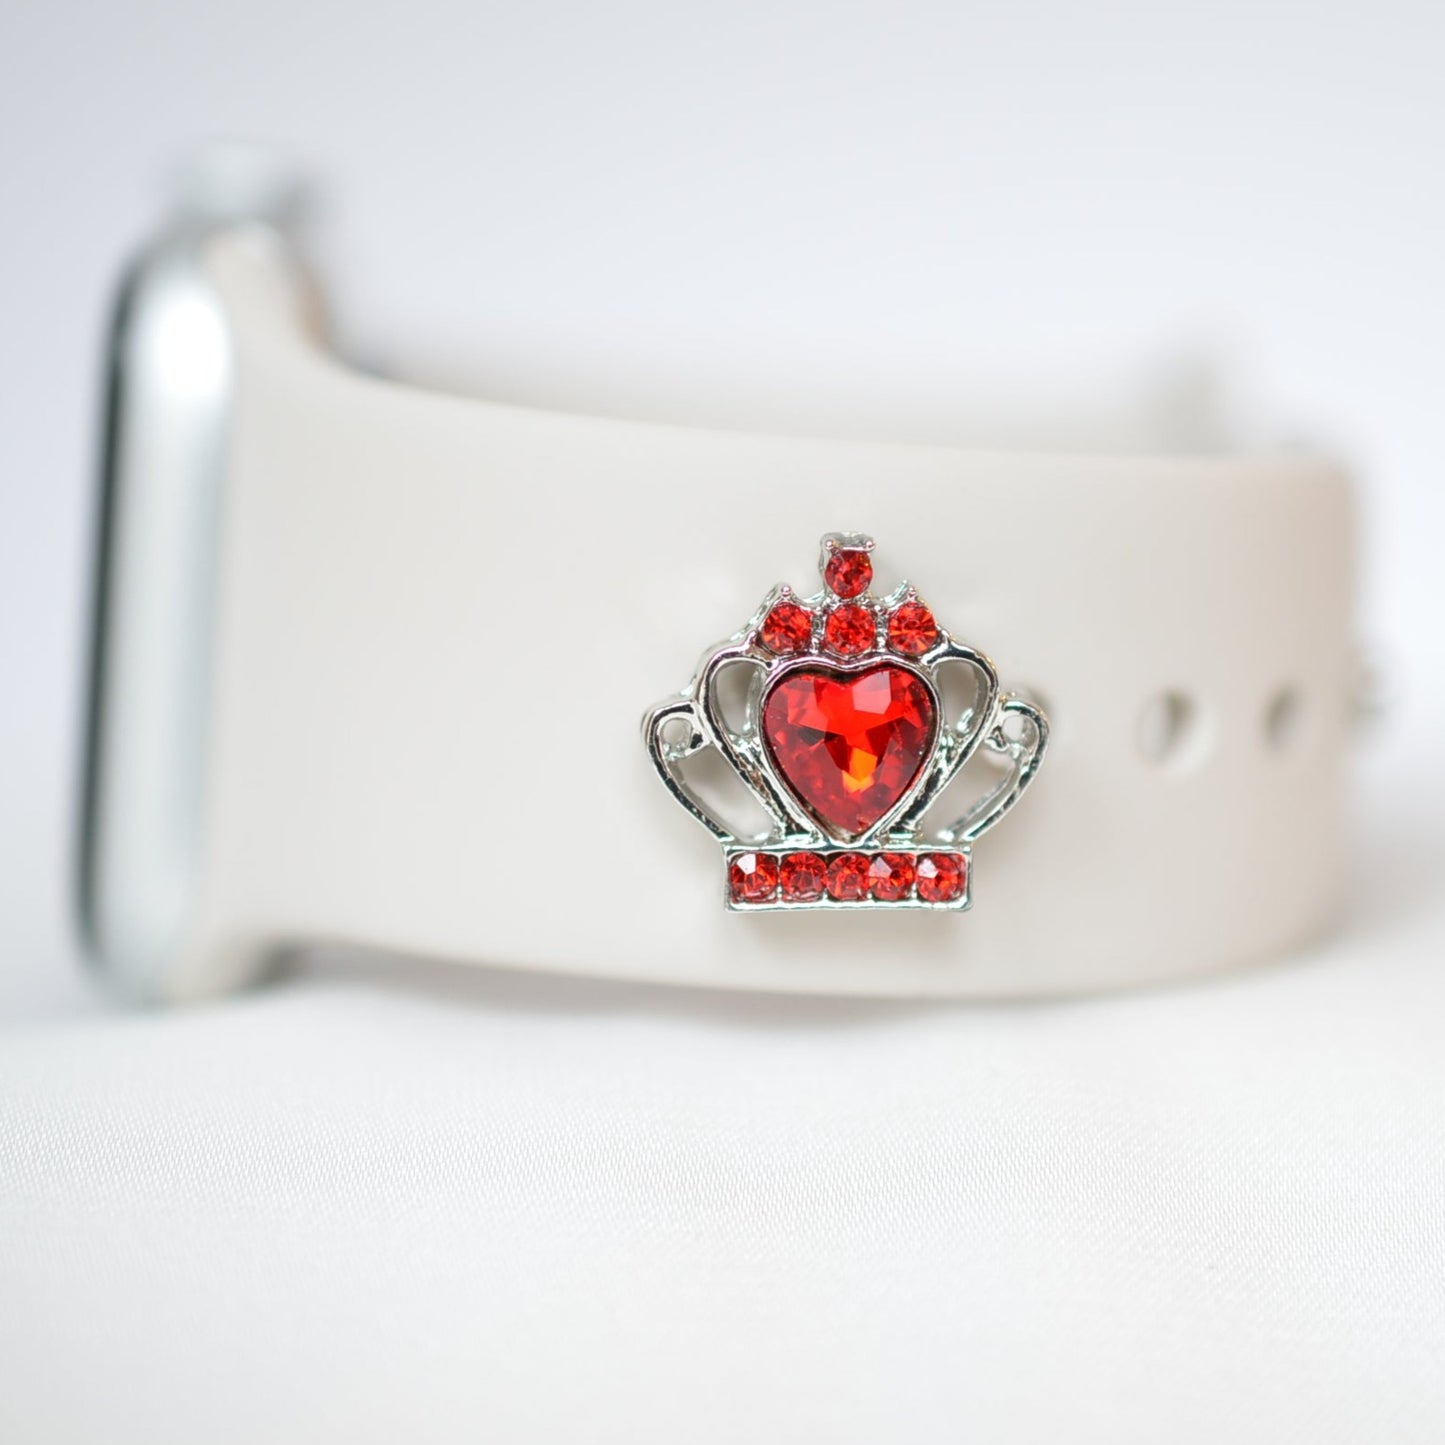 Red Crown Charm for Belts, Bags and Watch Bands